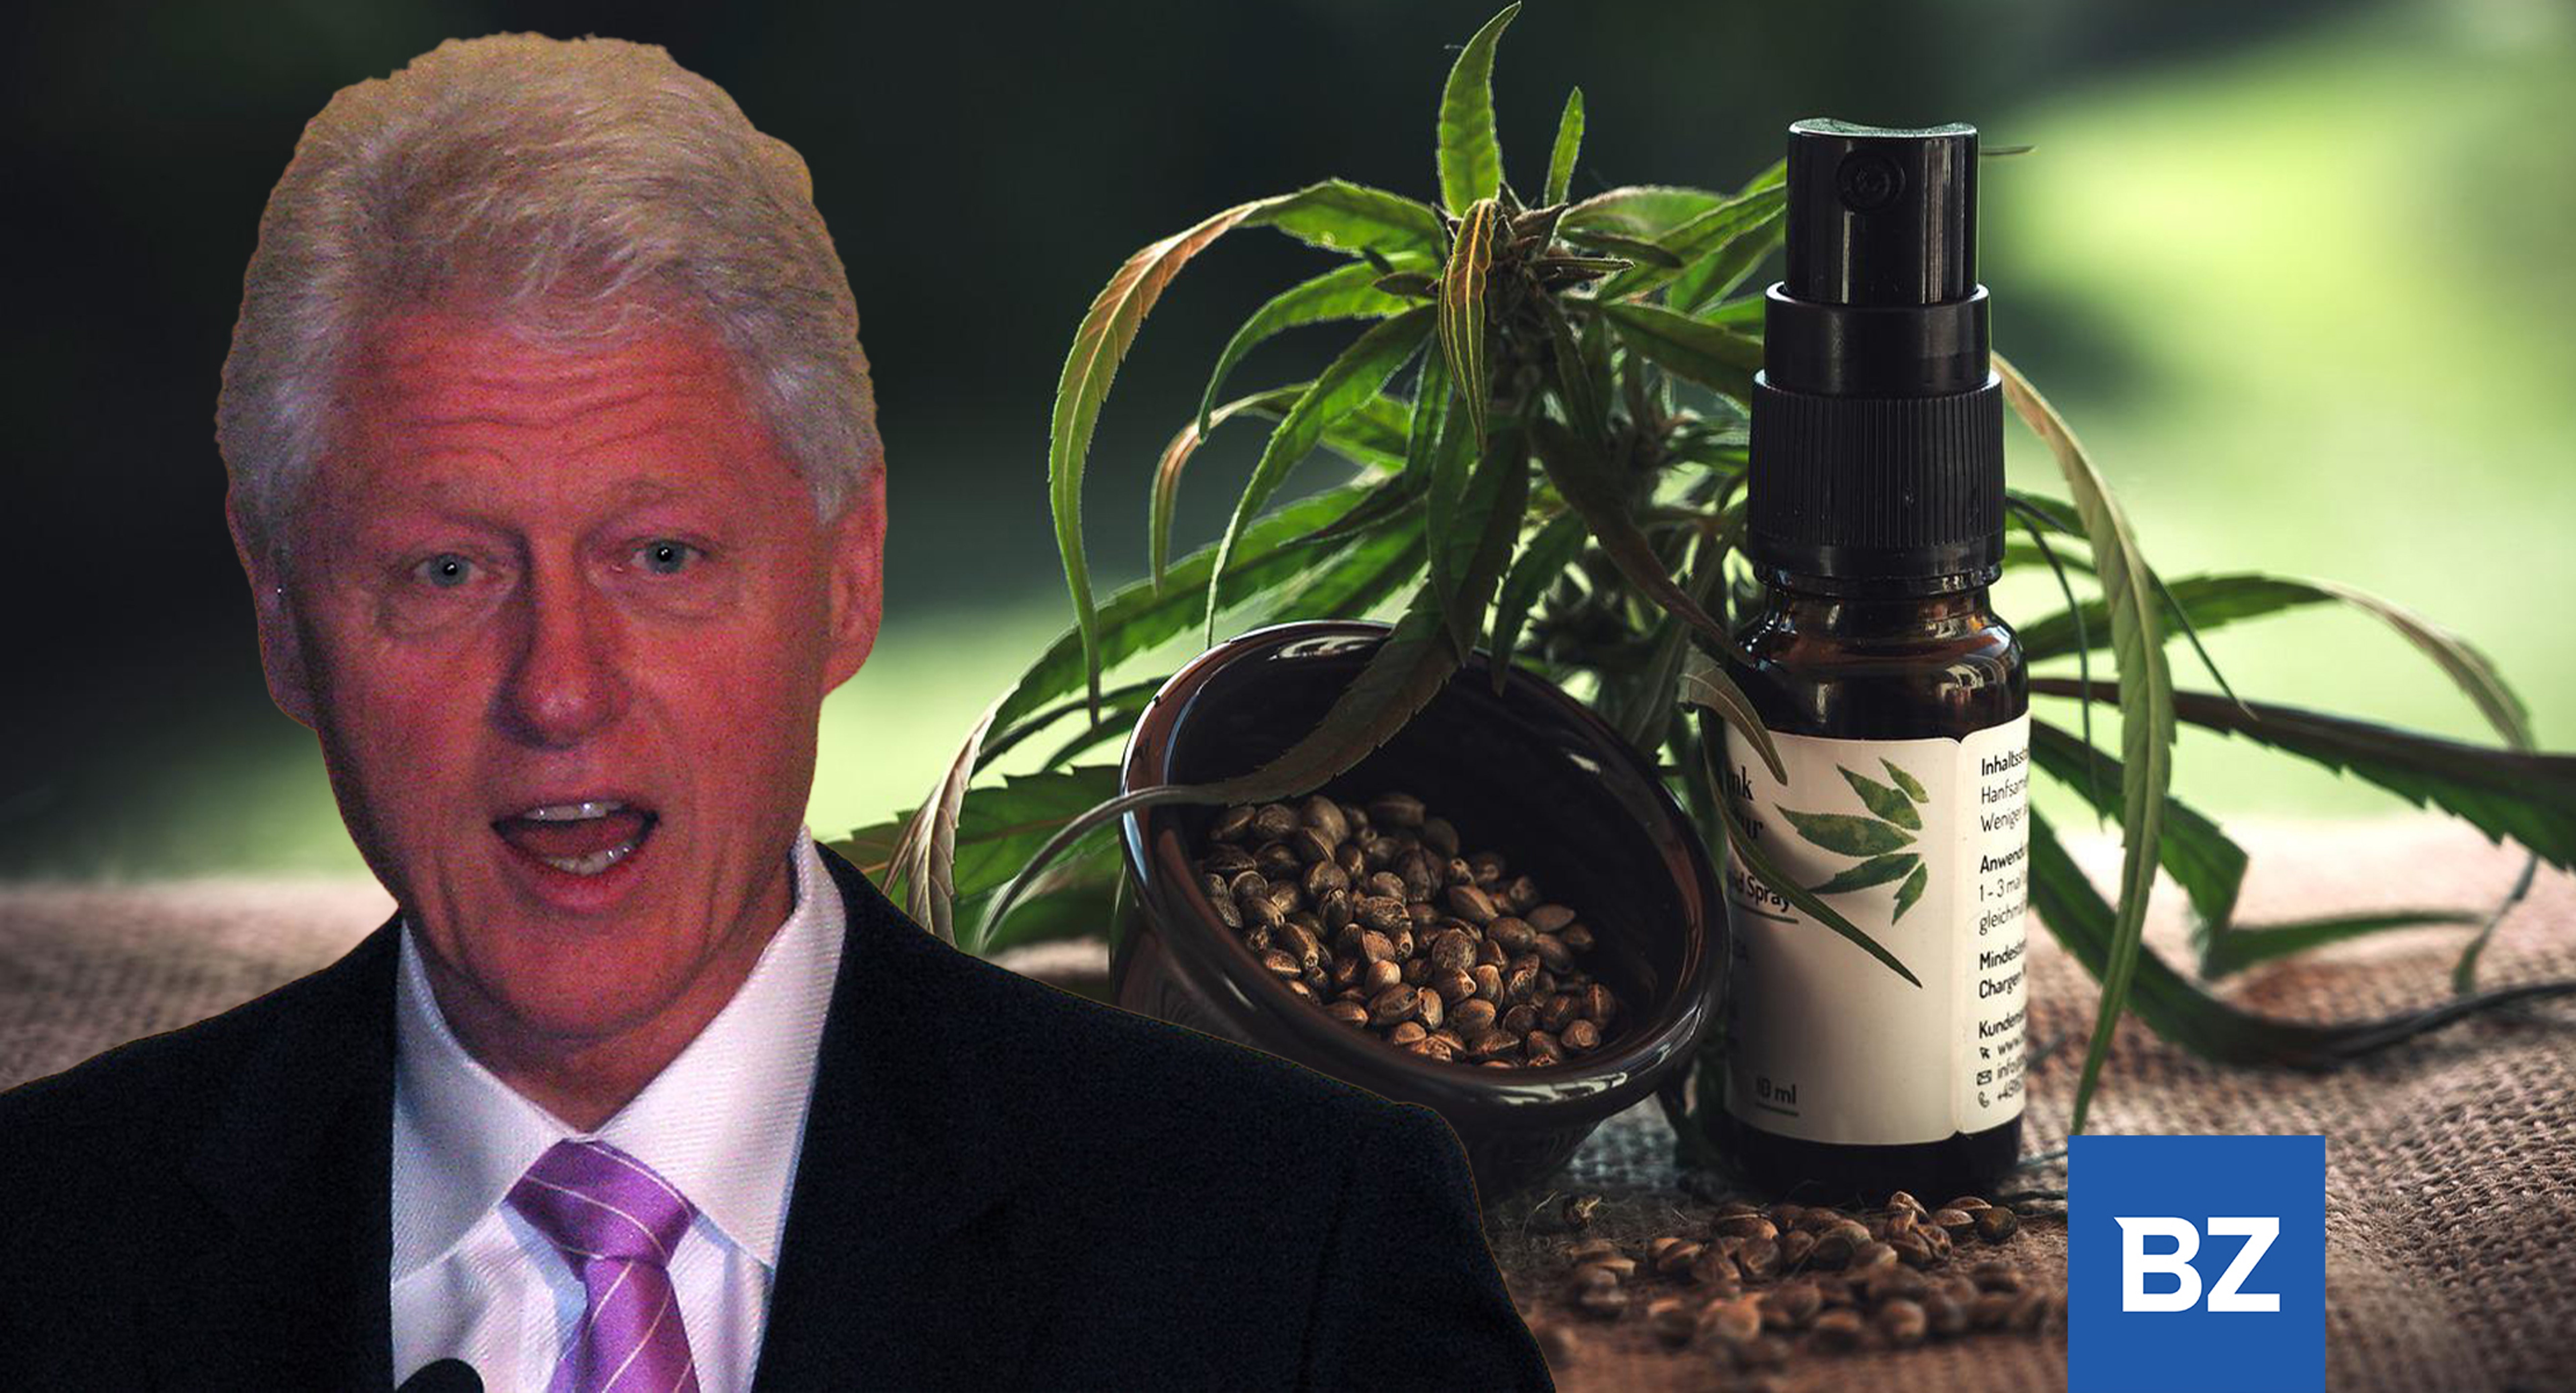 Bill Clinton Says CBD Shows Promising Results As Alternative To Opioids For Pain Management